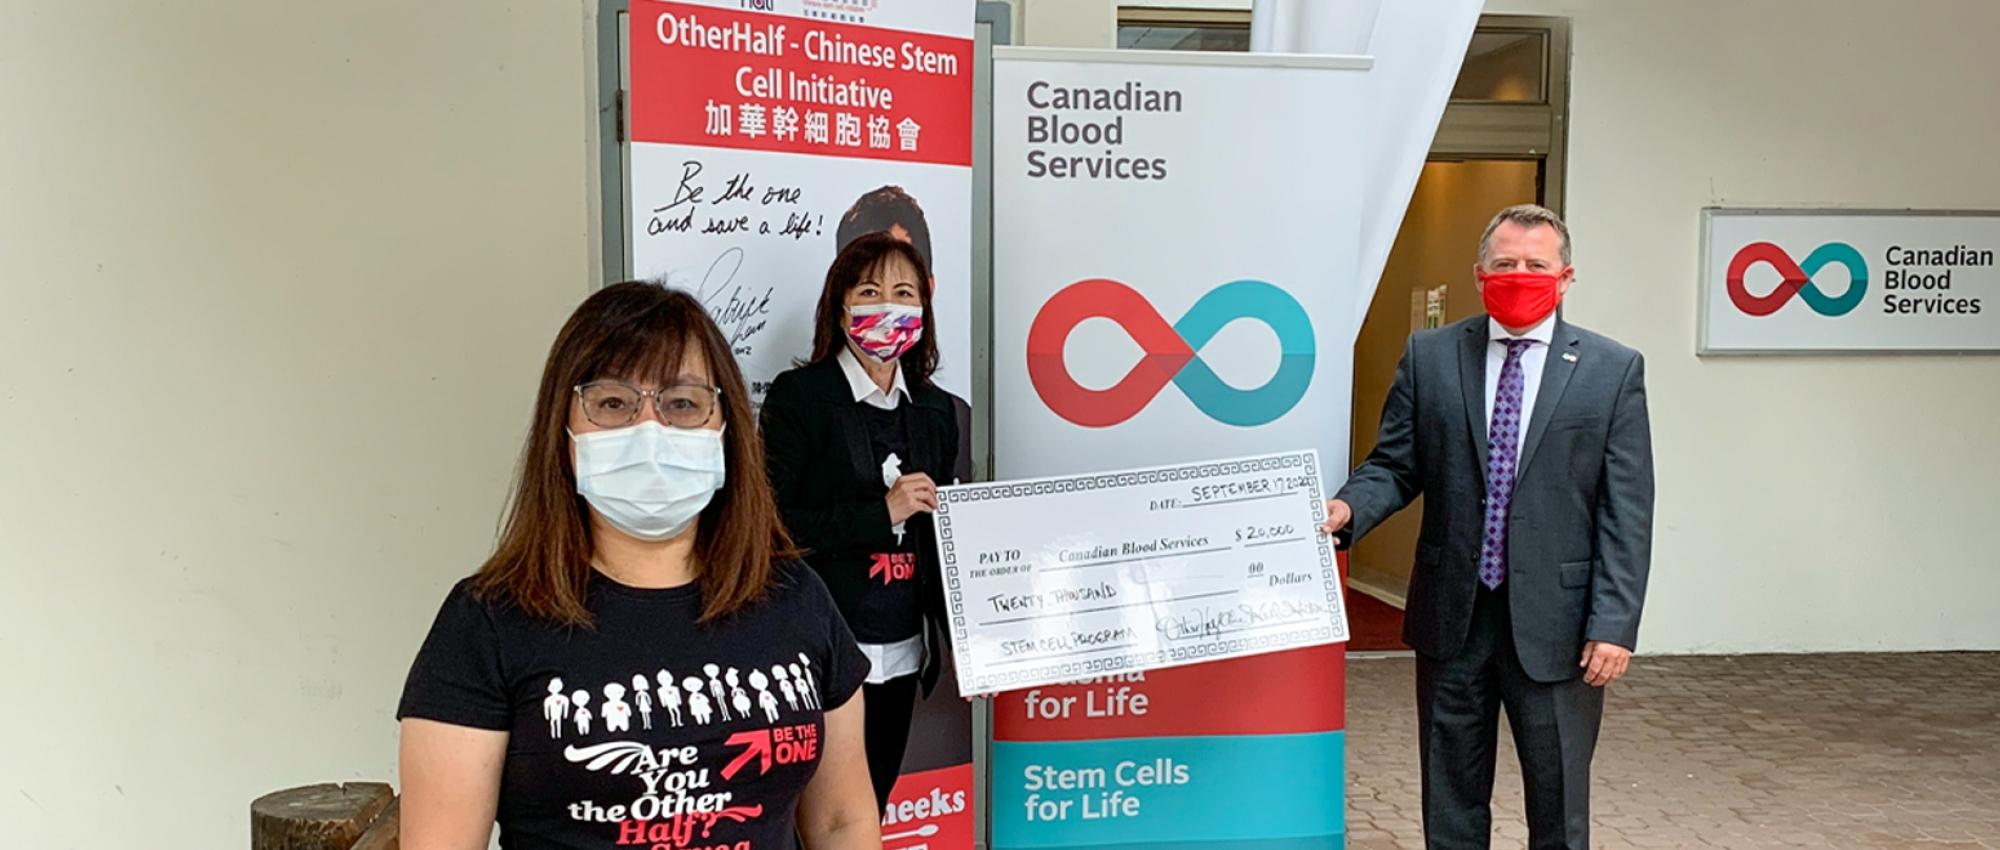 Image of Representatives of OtherHalf - Chinese Stem Cell Initiative holding up a giant cheque of $20,000 to Canadian Blood Services